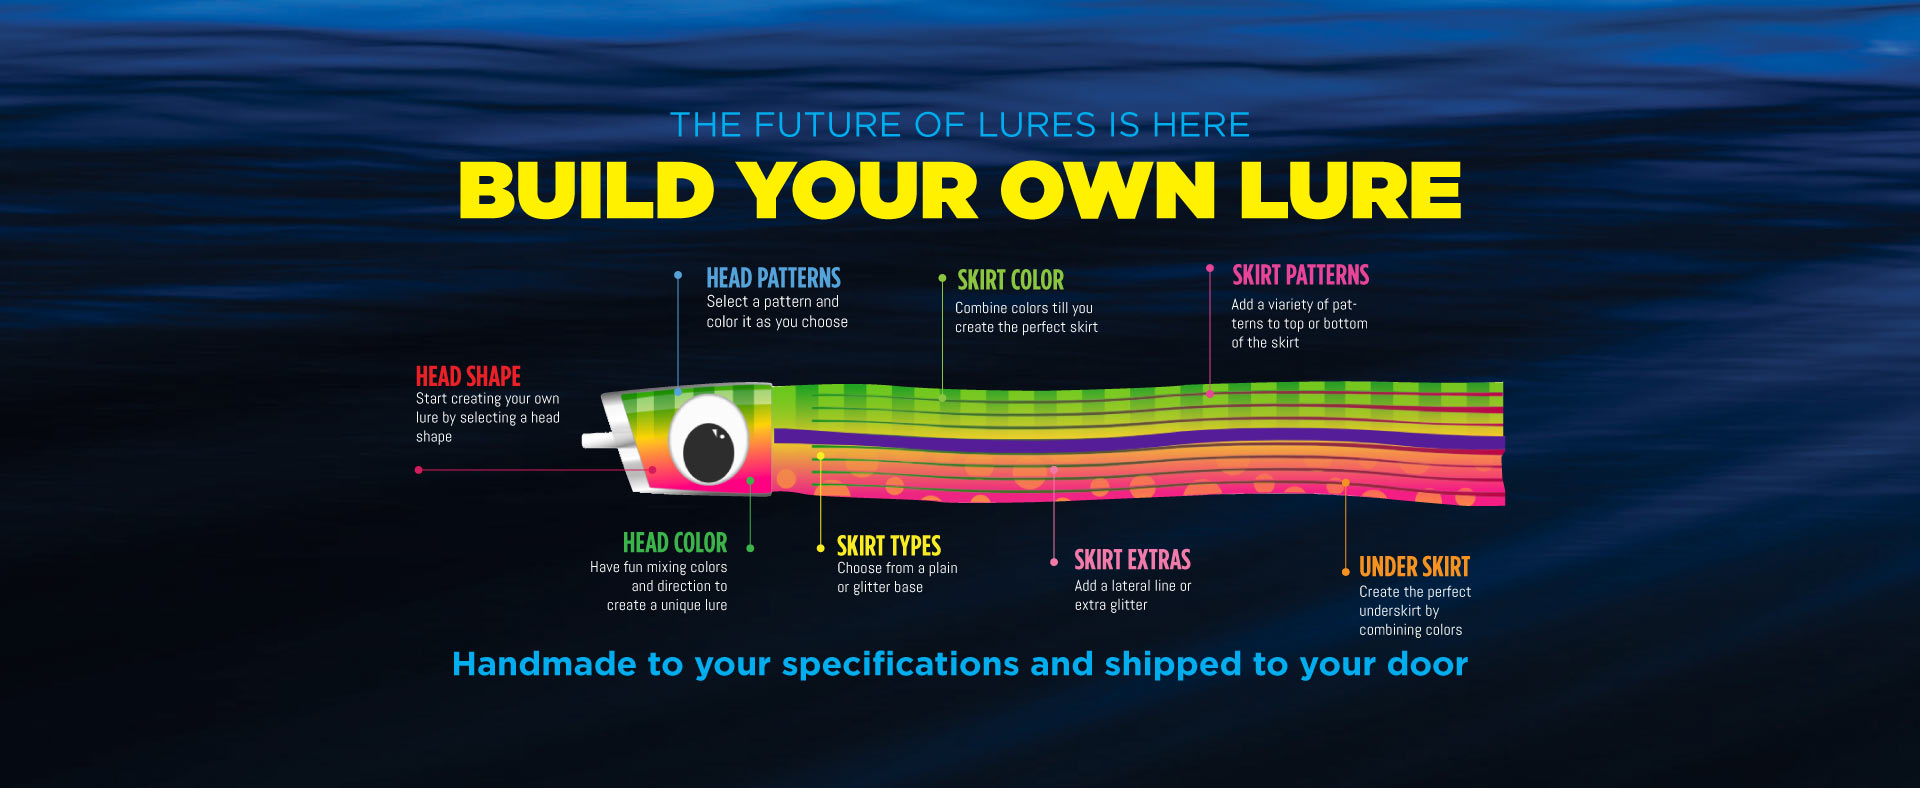 Build you own lure 3